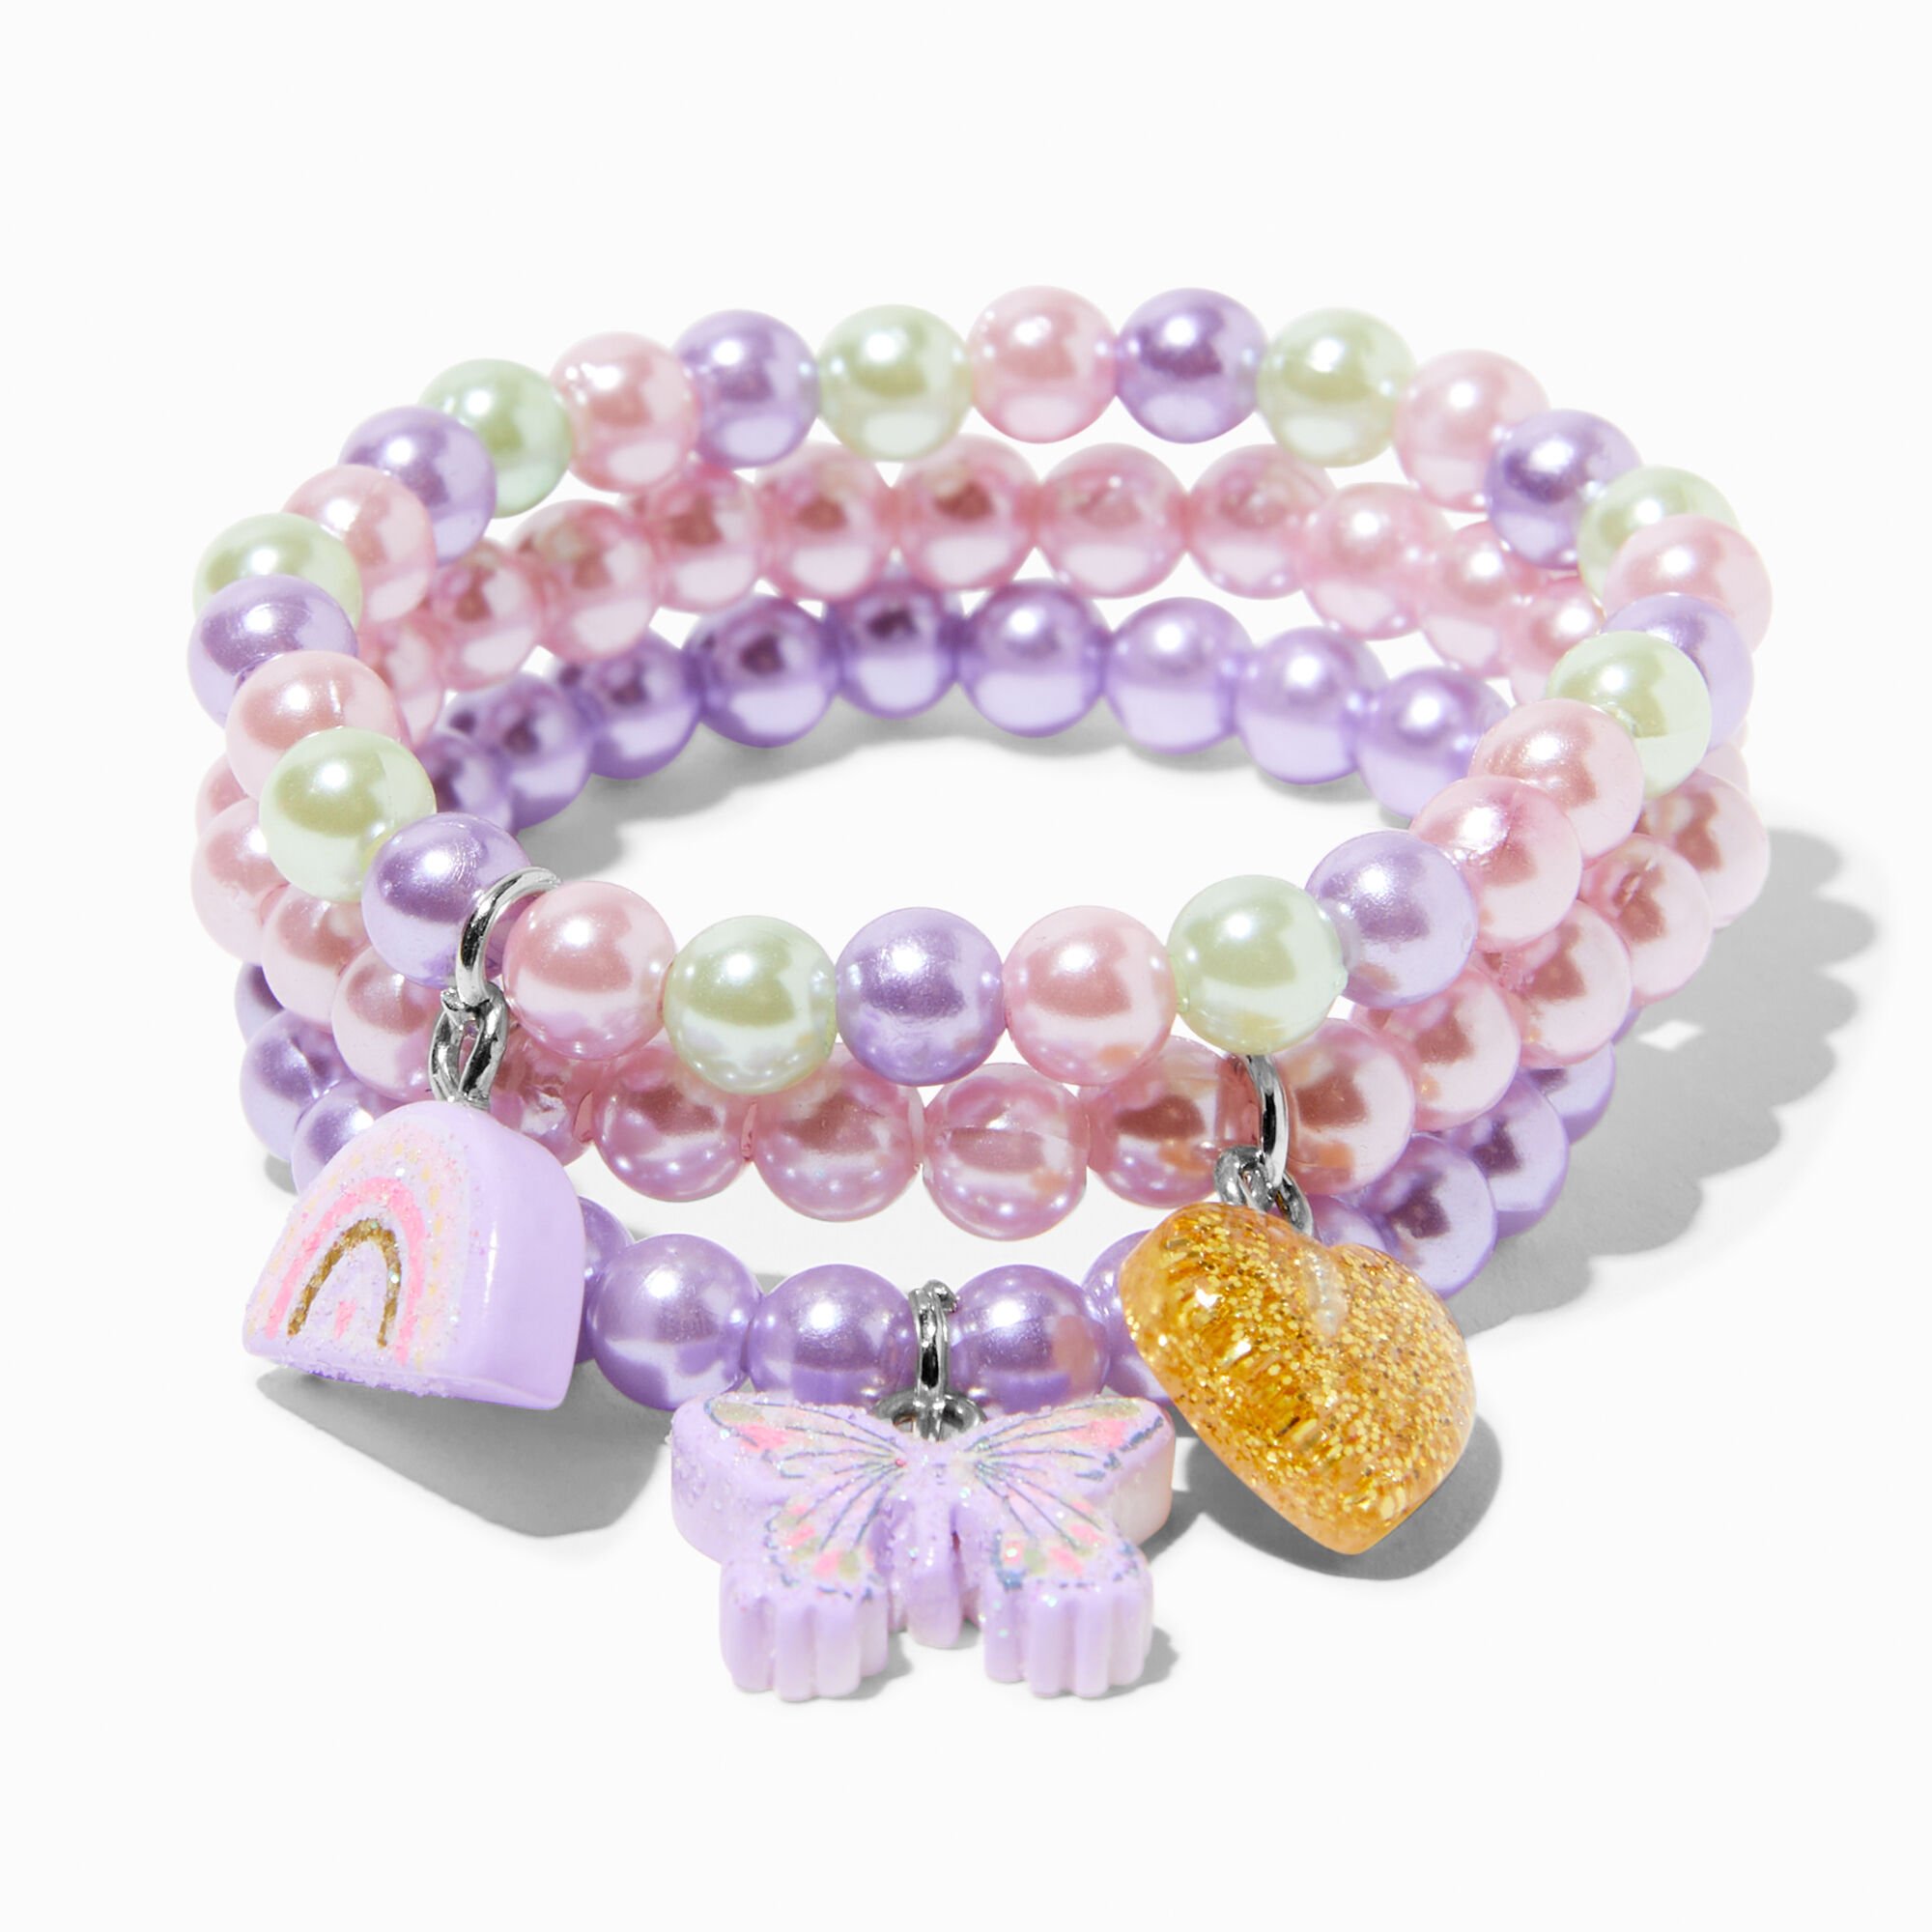 View Claires Club Pastel Pearl Beaded Stretch Bracelets 3 Pack Rainbow information